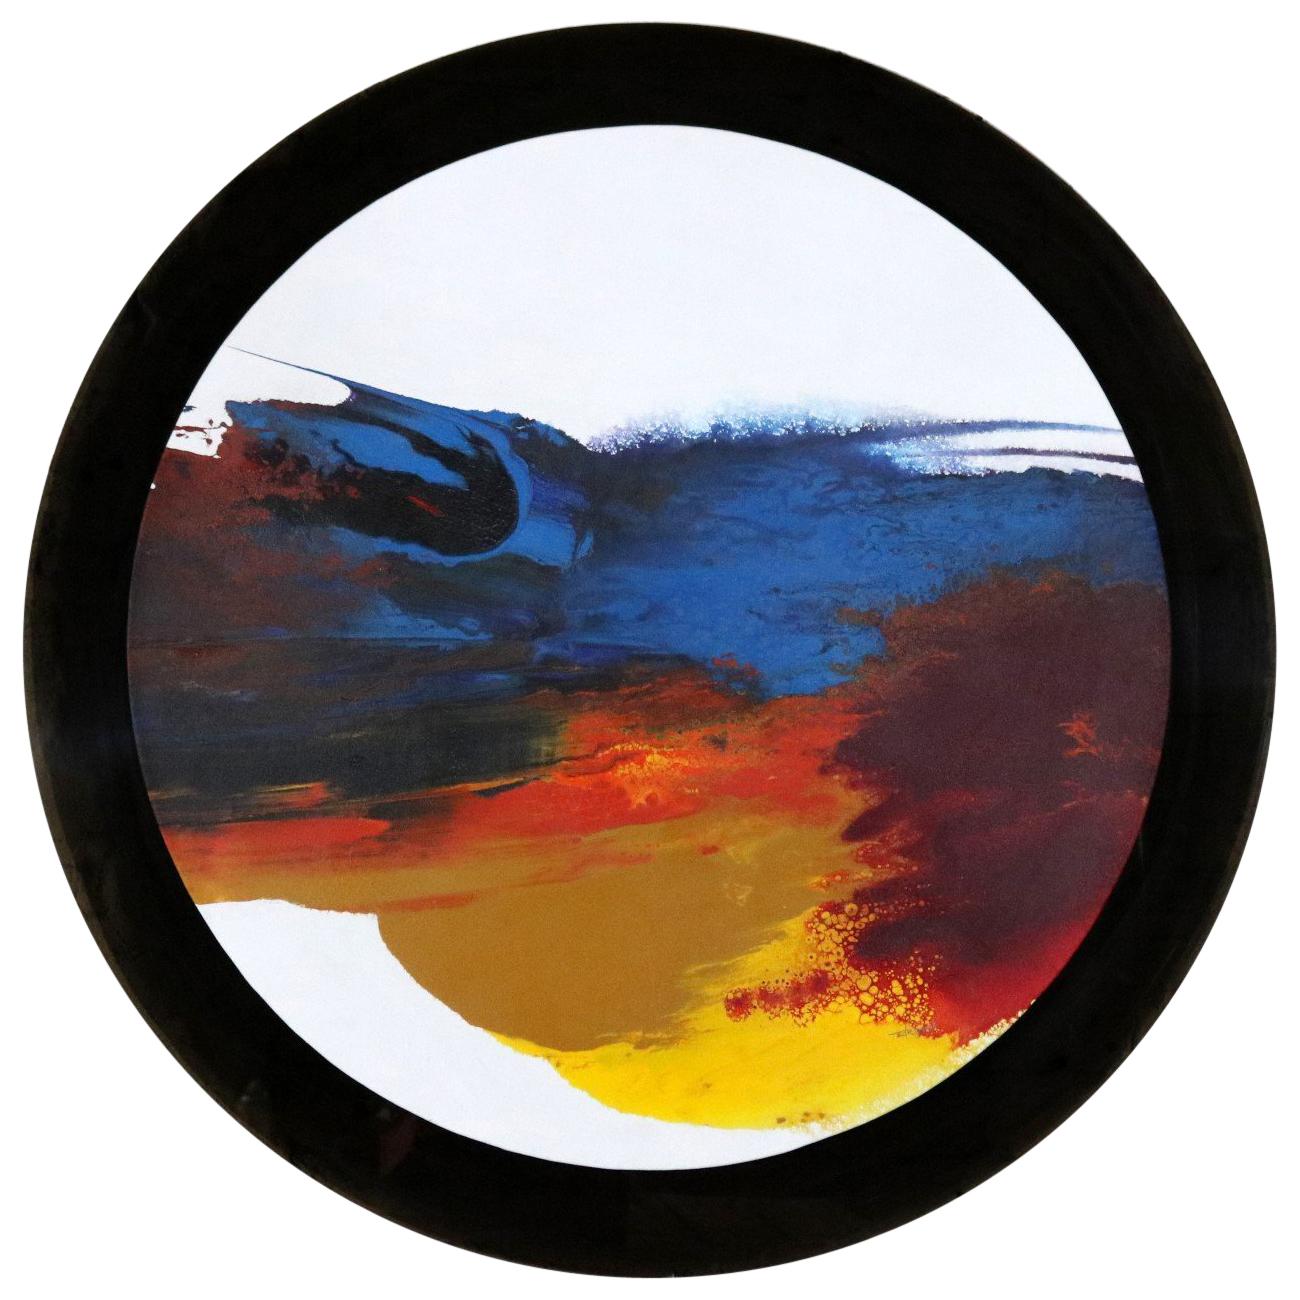 Abstract Round Acrylic Canvas Painting Mounted Smoke Plexiglass by Ted R. Lownik For Sale